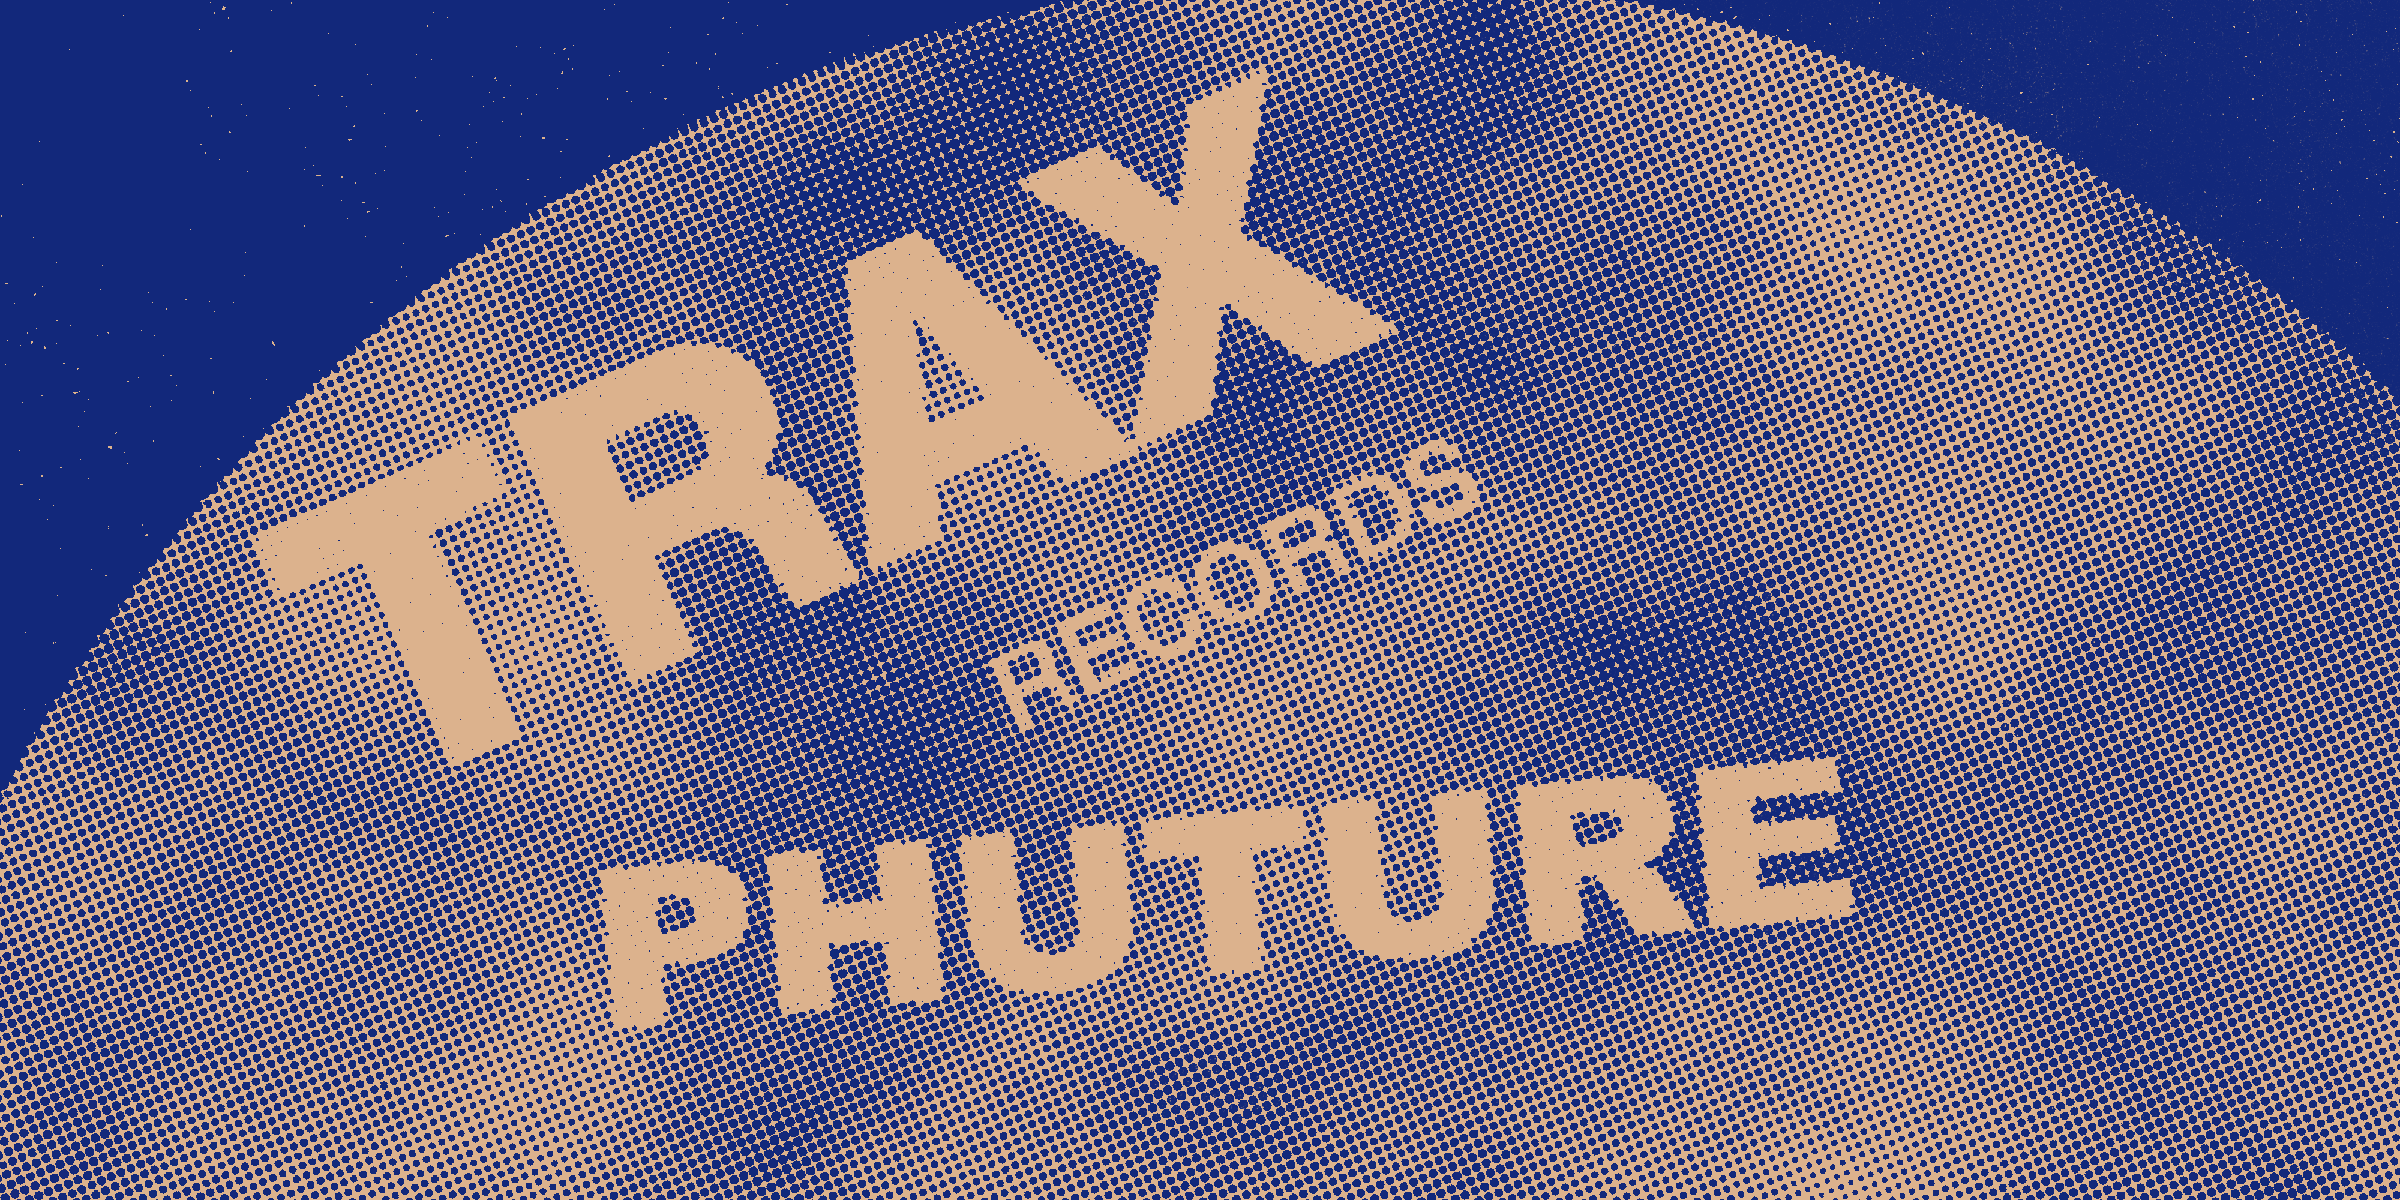 Trax Records and the sound of house to come